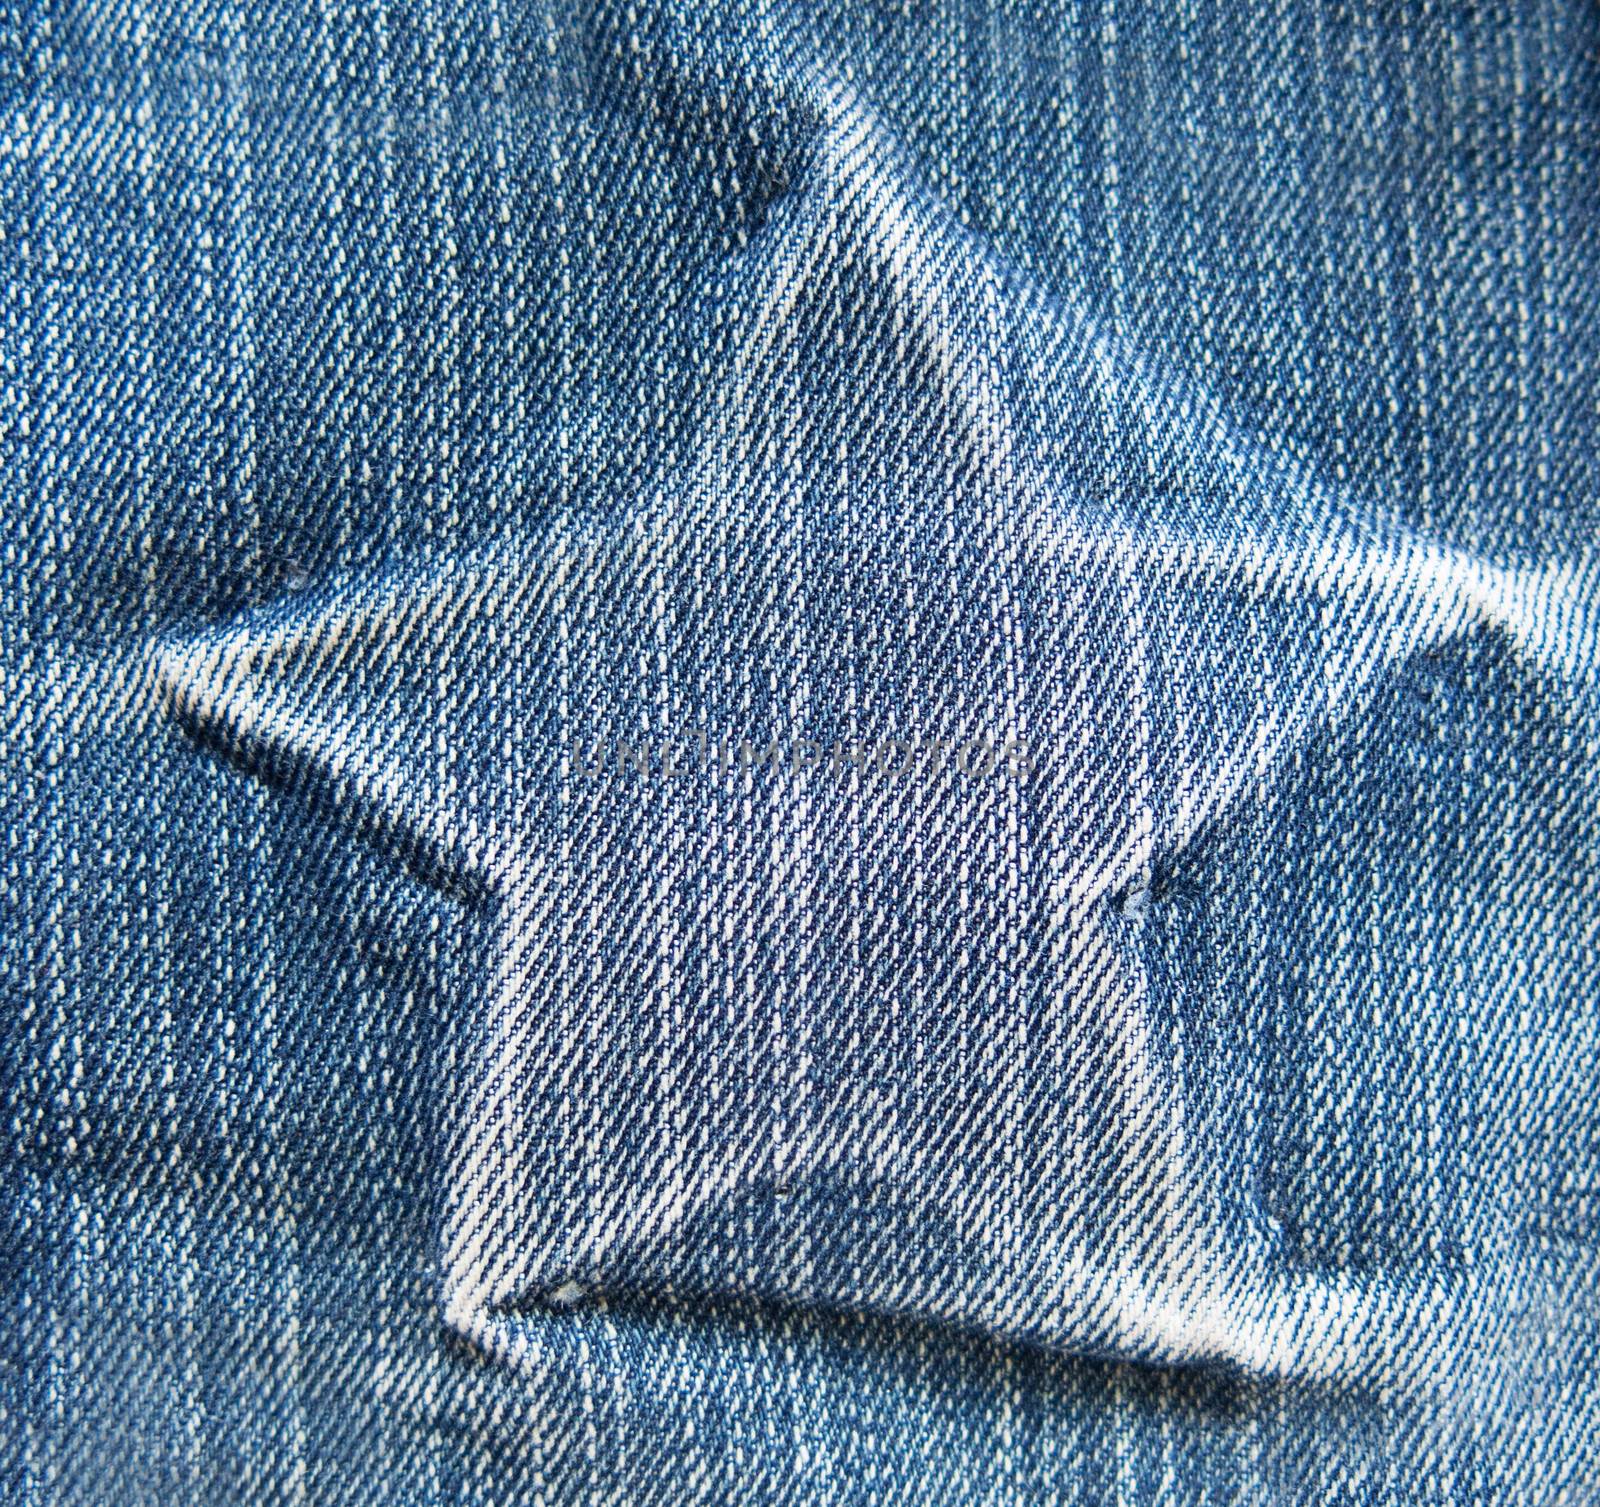 star on denim texture. light blue natural clean denim texture for the traditional business background in cold bright colors with diagonal shift tilt lines and stitches by asiandelight